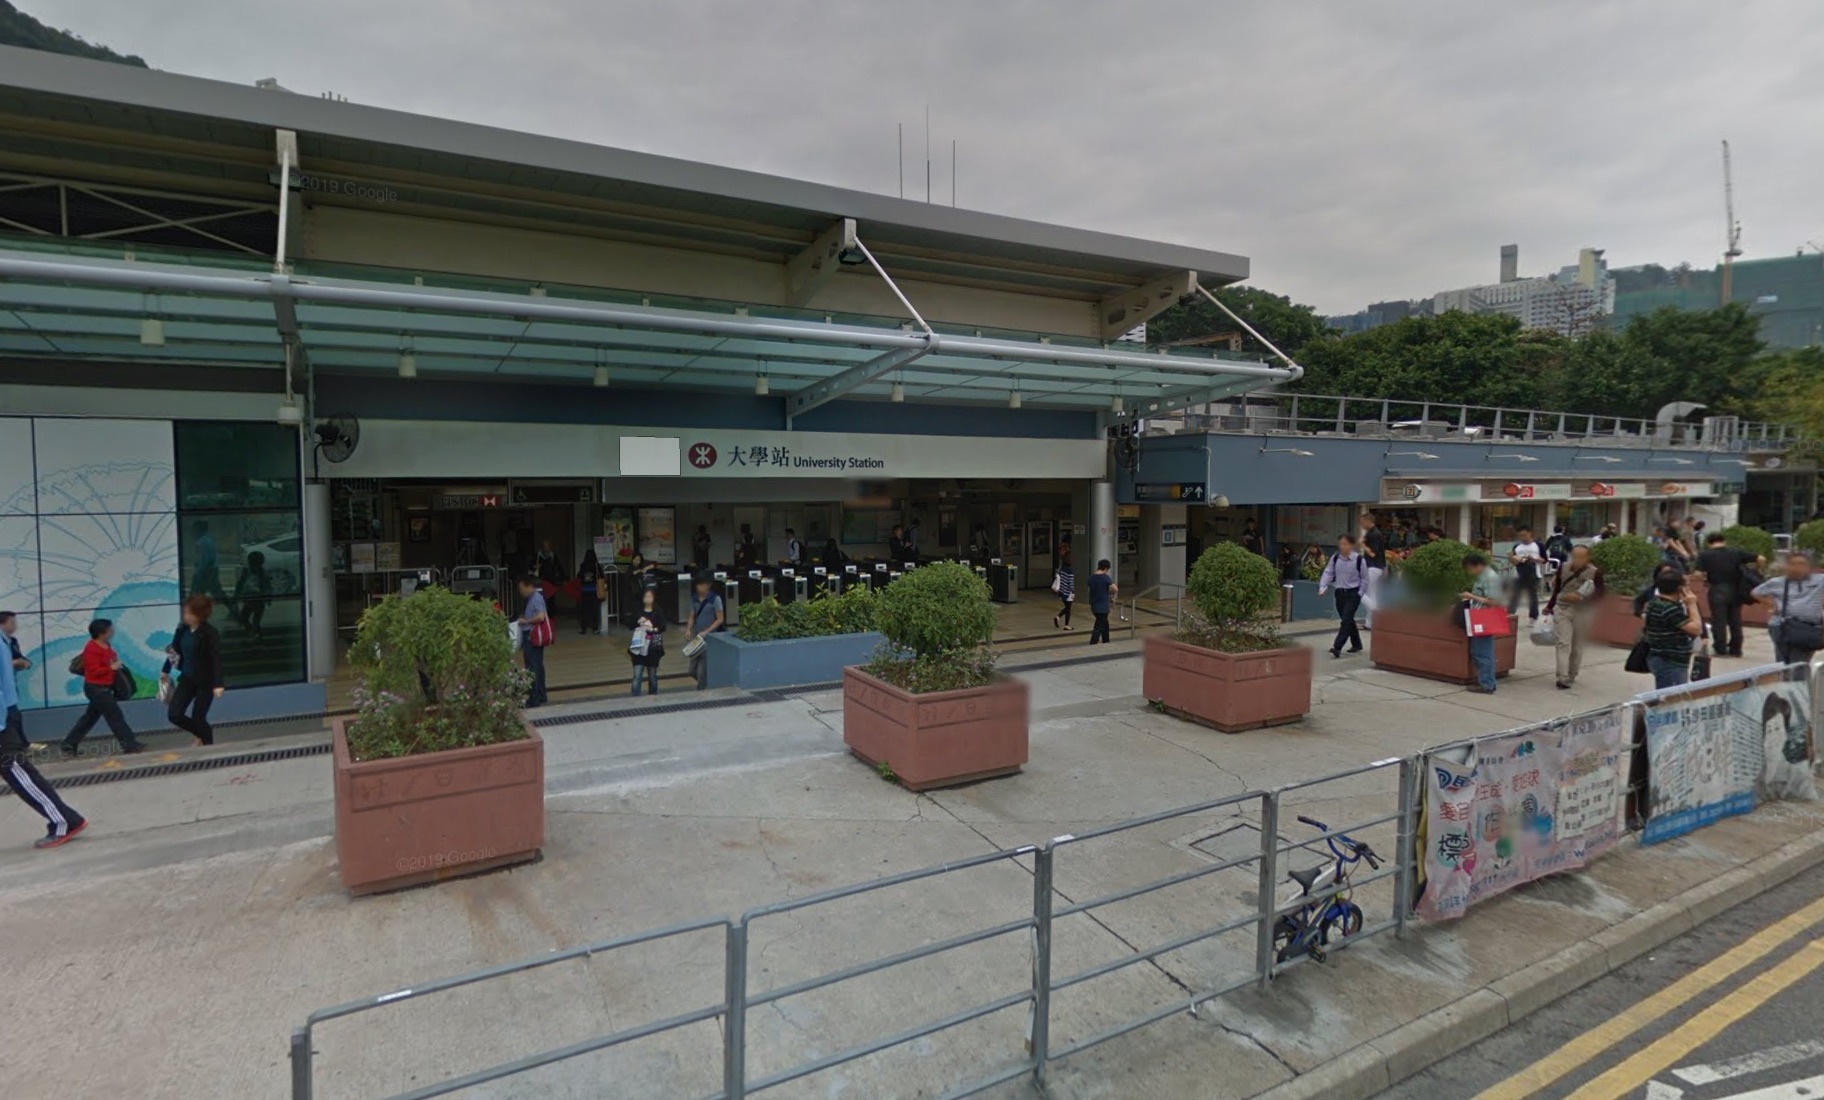 University Station, where some objects were thrown onto the tracks in an apparent attempt to slow the rail link to the mainland border. Photo via Google Maps.